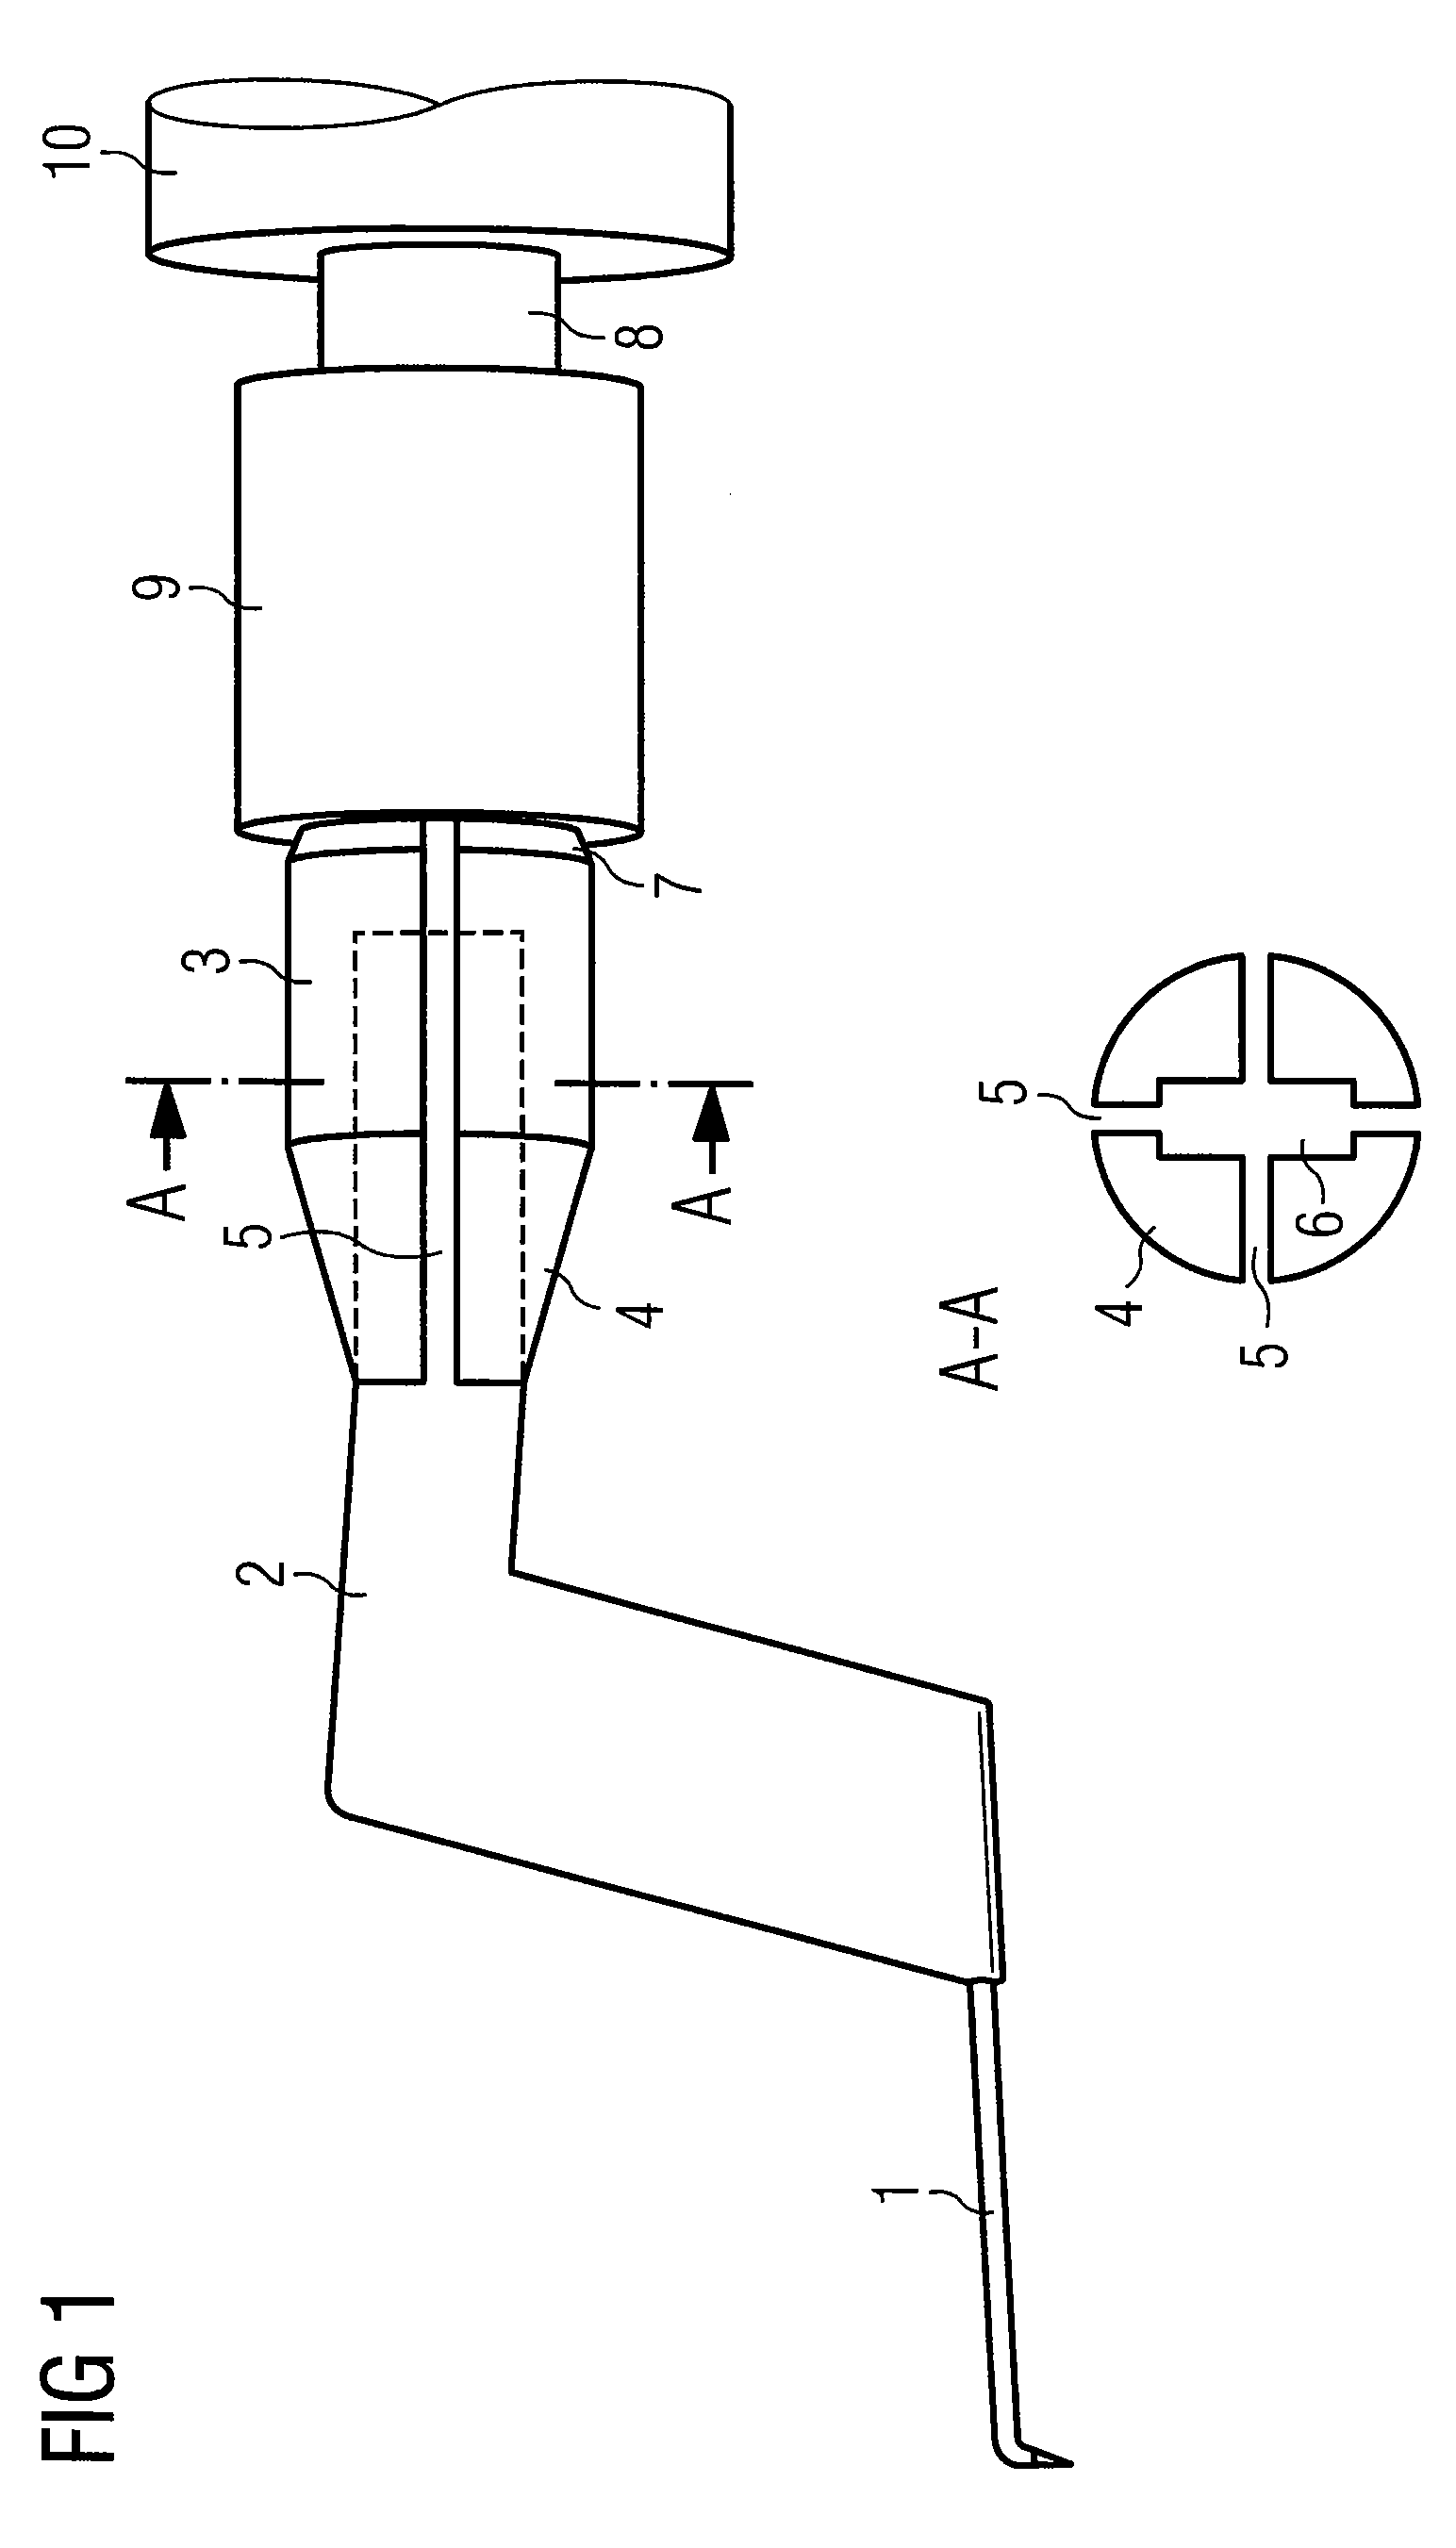 Probe receptacle for mounting a probe for testing semiconductor components, probe holder arm and test apparatus